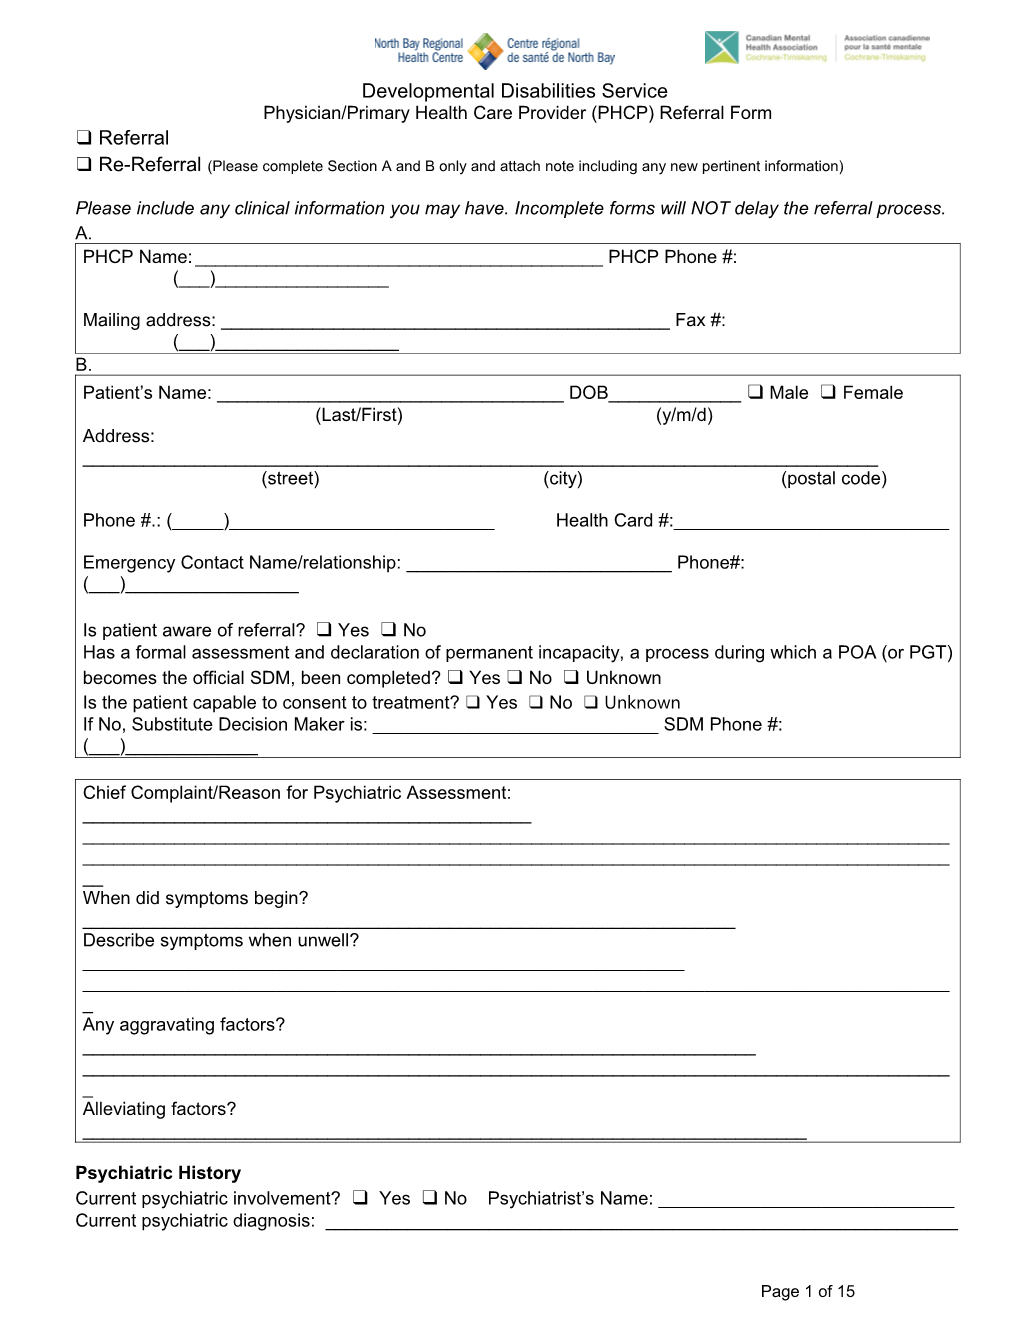 Physician/Primary Health Care Provider (PHCP) Referral Form